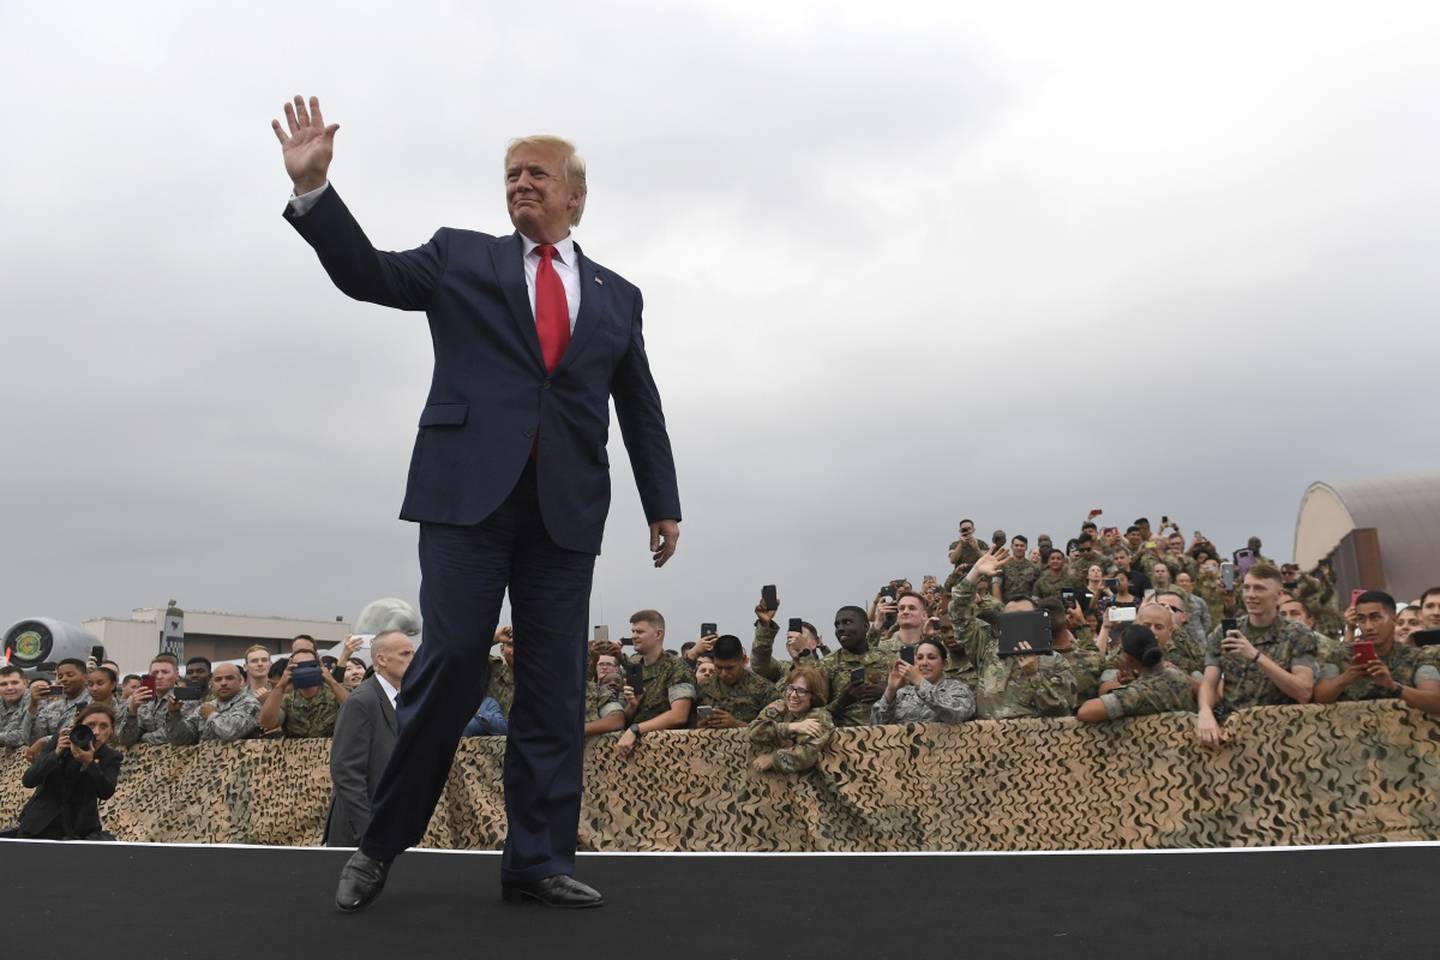 President Donald Trump arrives to speak to troops at Osan Air Base in South Korea, Sunday, June 30, 2019.